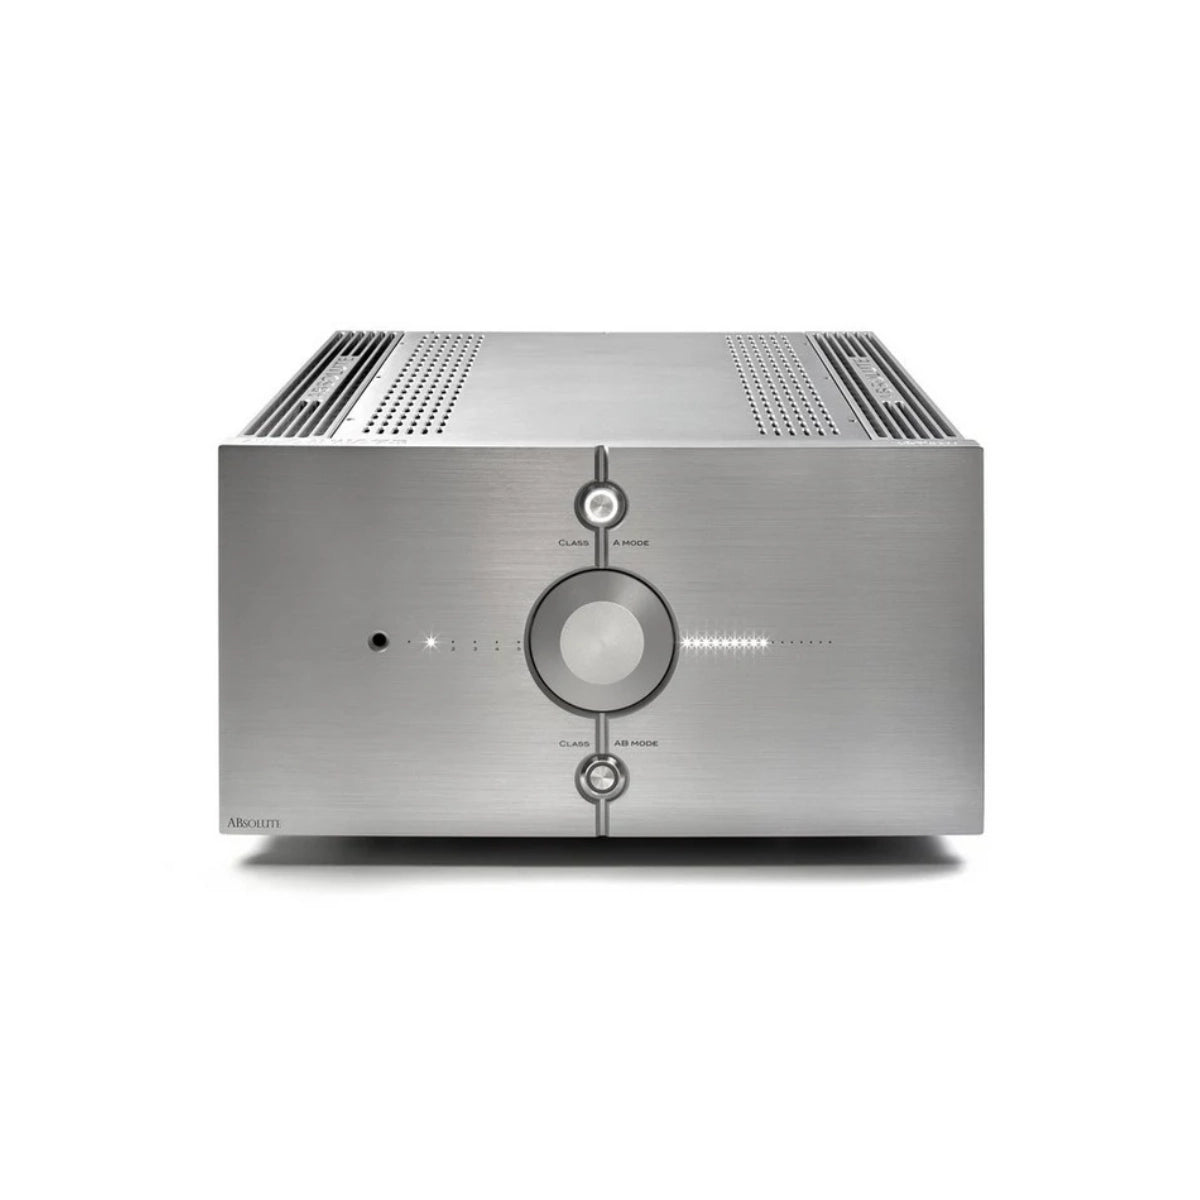 An image of Audio Analogue's Absolute 50w pure class-a integrated amplifier in silver finish.